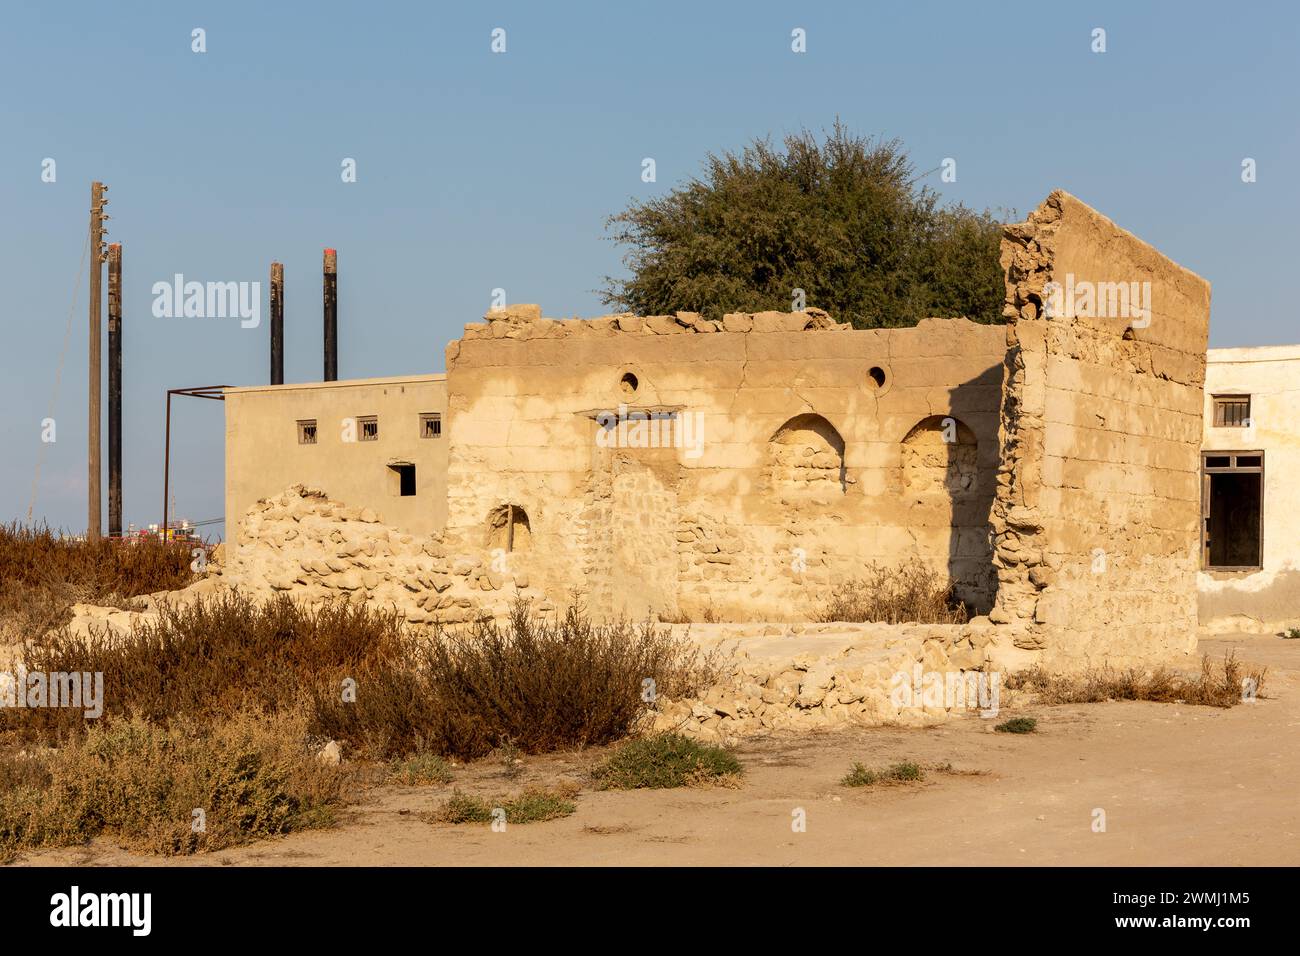 Ruined residential building wall with arabic style arch windows in Al Jazirah Al Hamra haunted town in Ras Al Khaimah, United Arab Emirates. Stock Photo